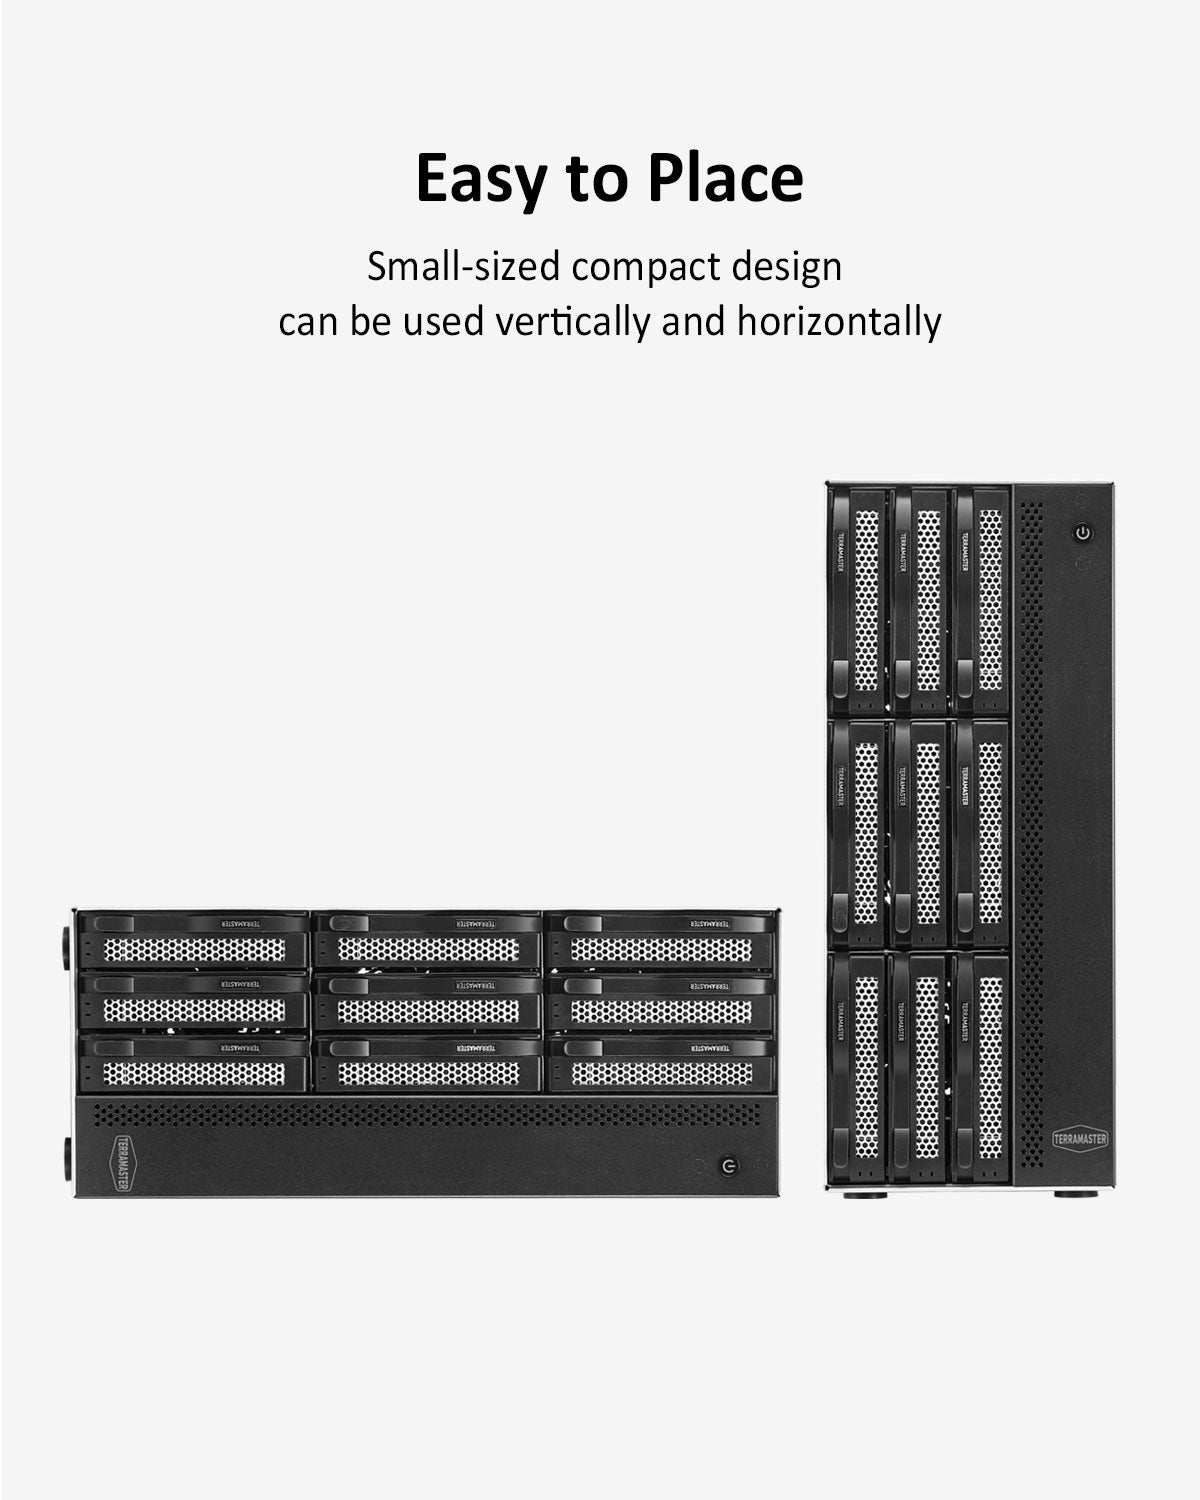 TERRAMASTER T9-450 9Bay 10Gb NAS Storage - High Speed Network Attached Storage with Intel Quad-core CPU, 8GB DDR4, Dual SFP+ 10GbE Interfaces, Dual 2.5GbE Ports, NAS Server (Diskless)